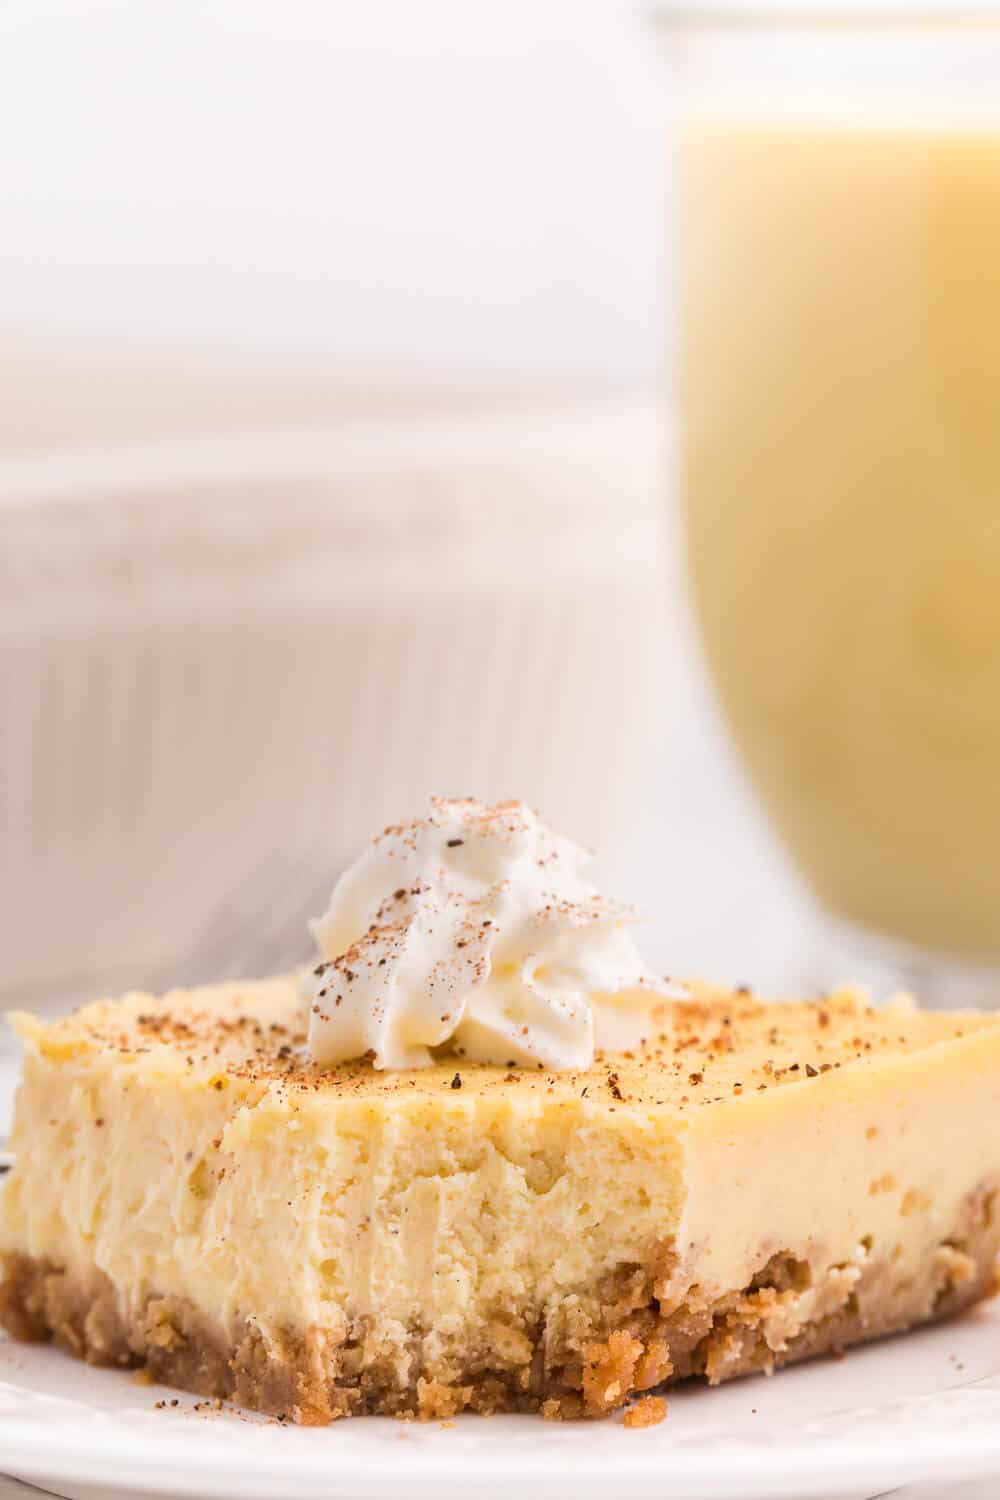 Eggnog cheesecake bar with a slice bitten off the end.